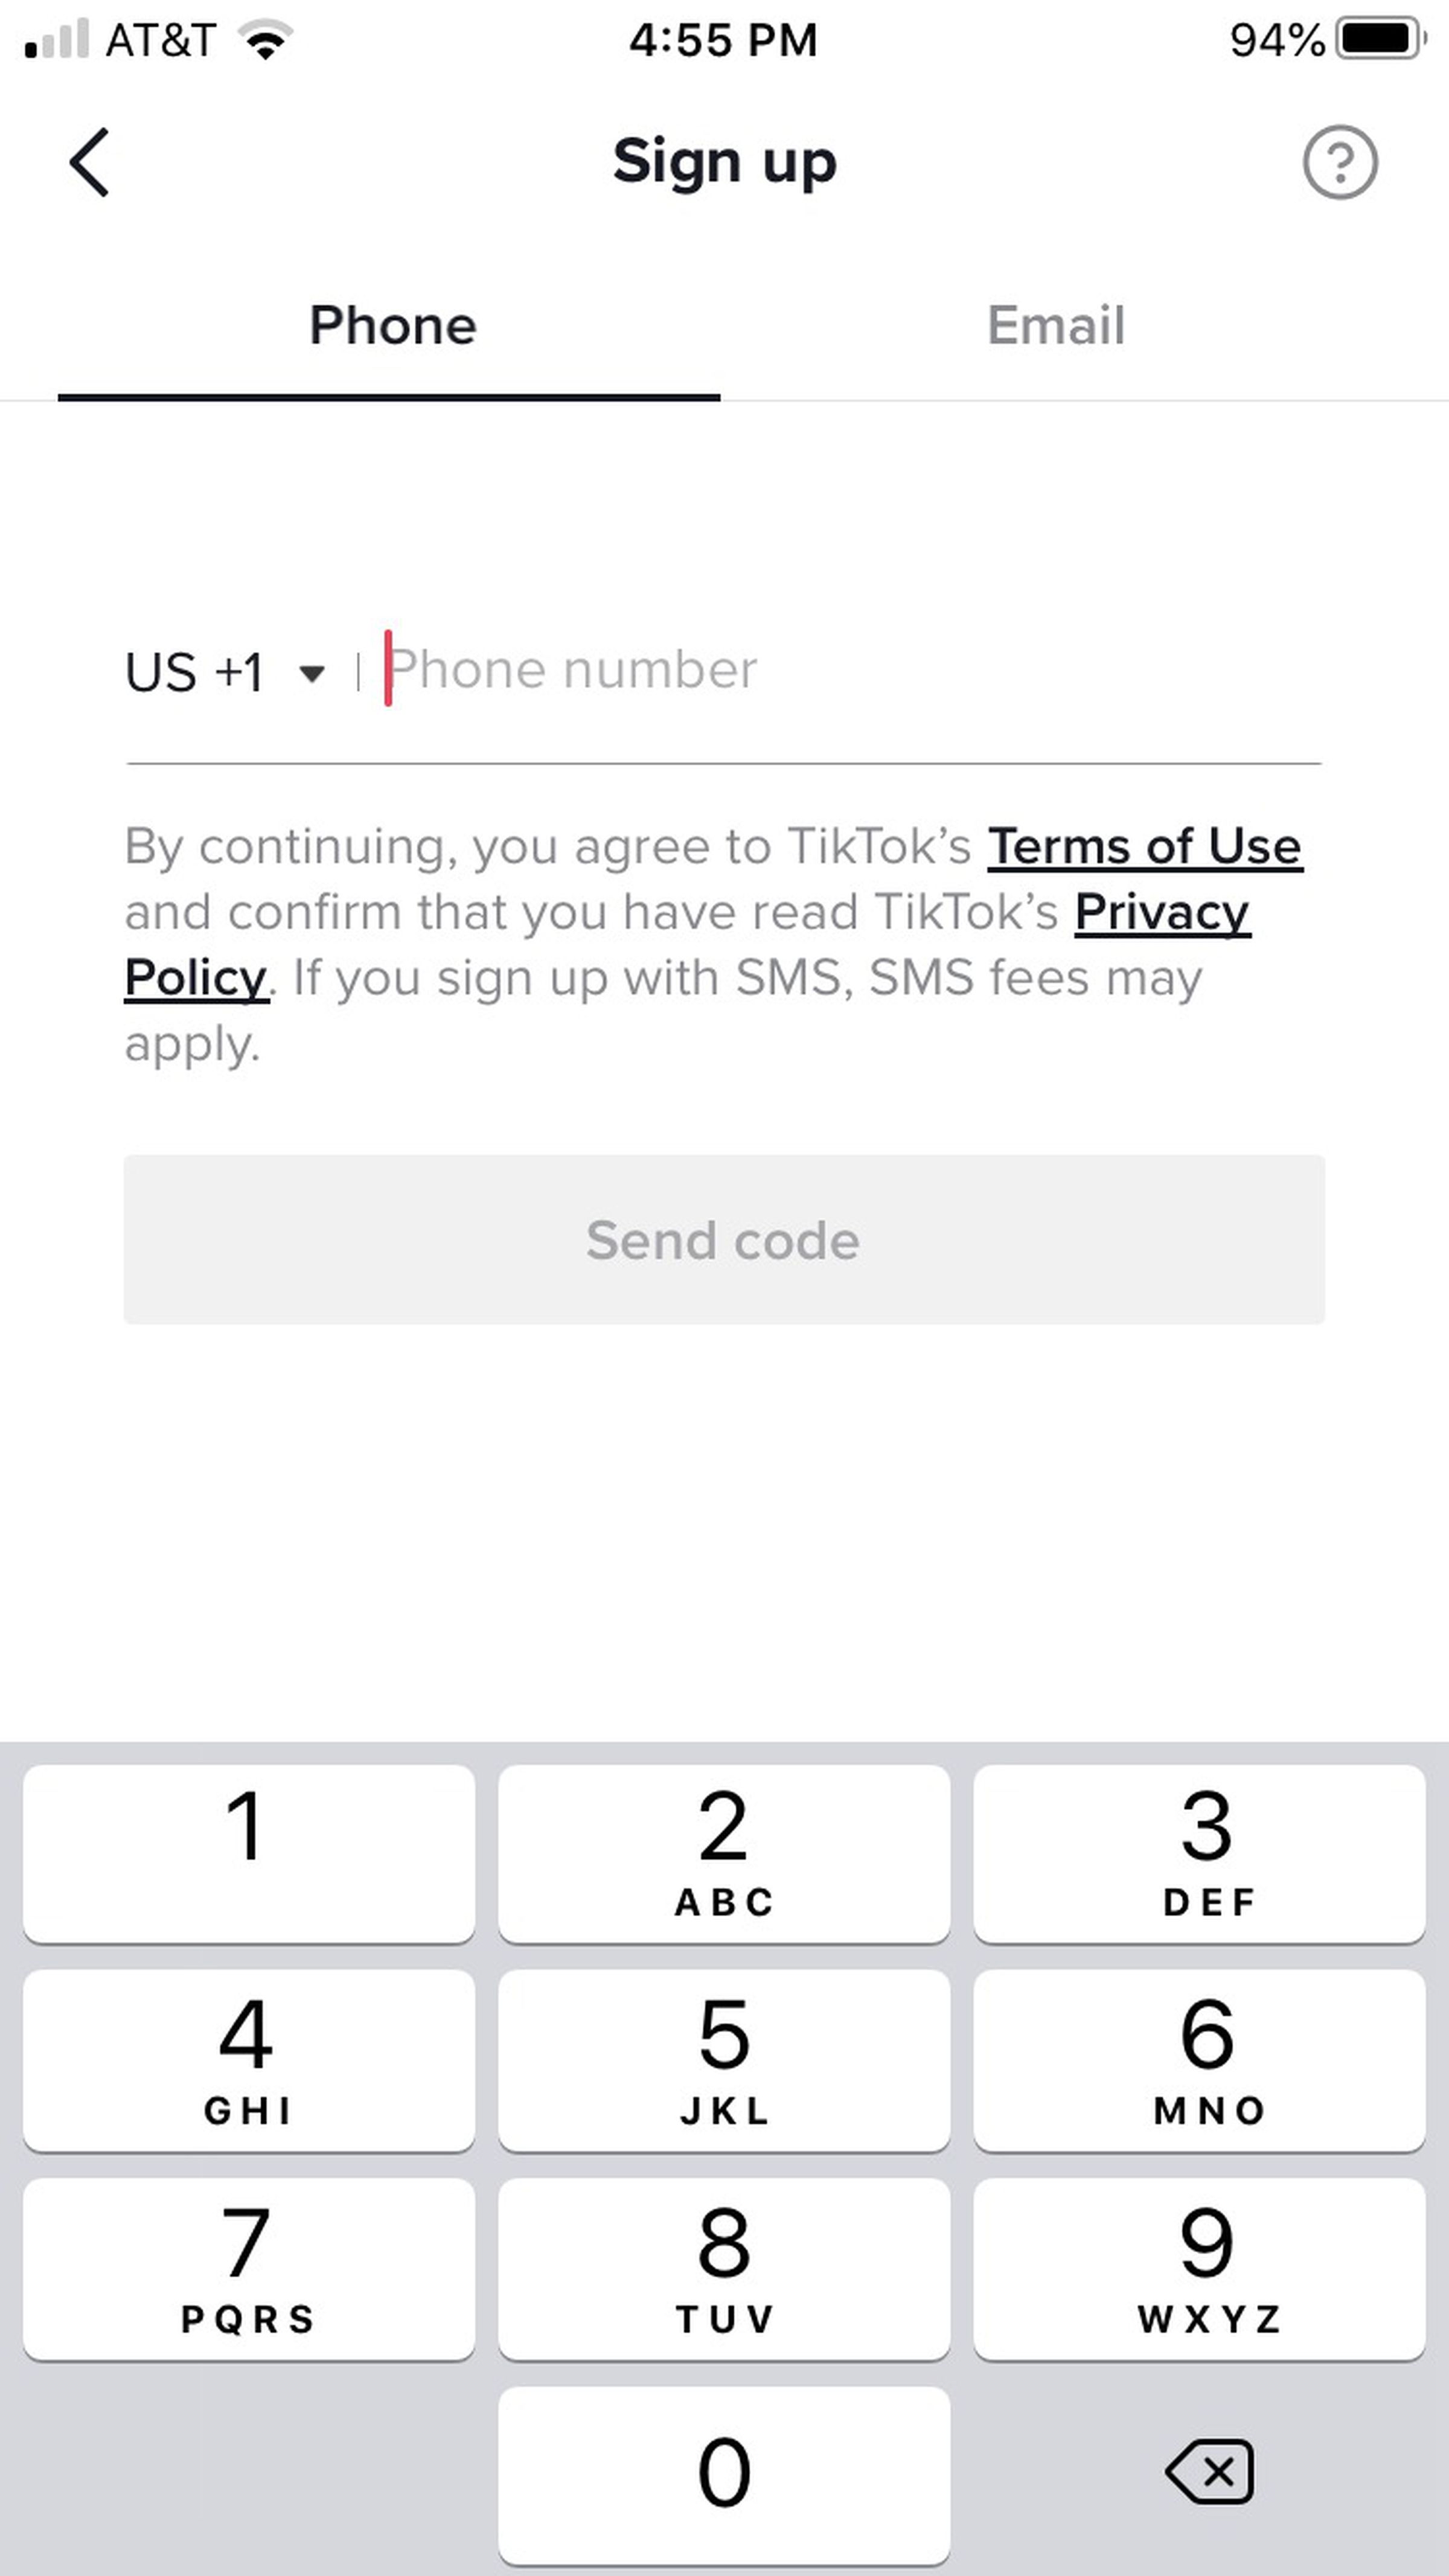 Sign up screen with the tab for using your phone number